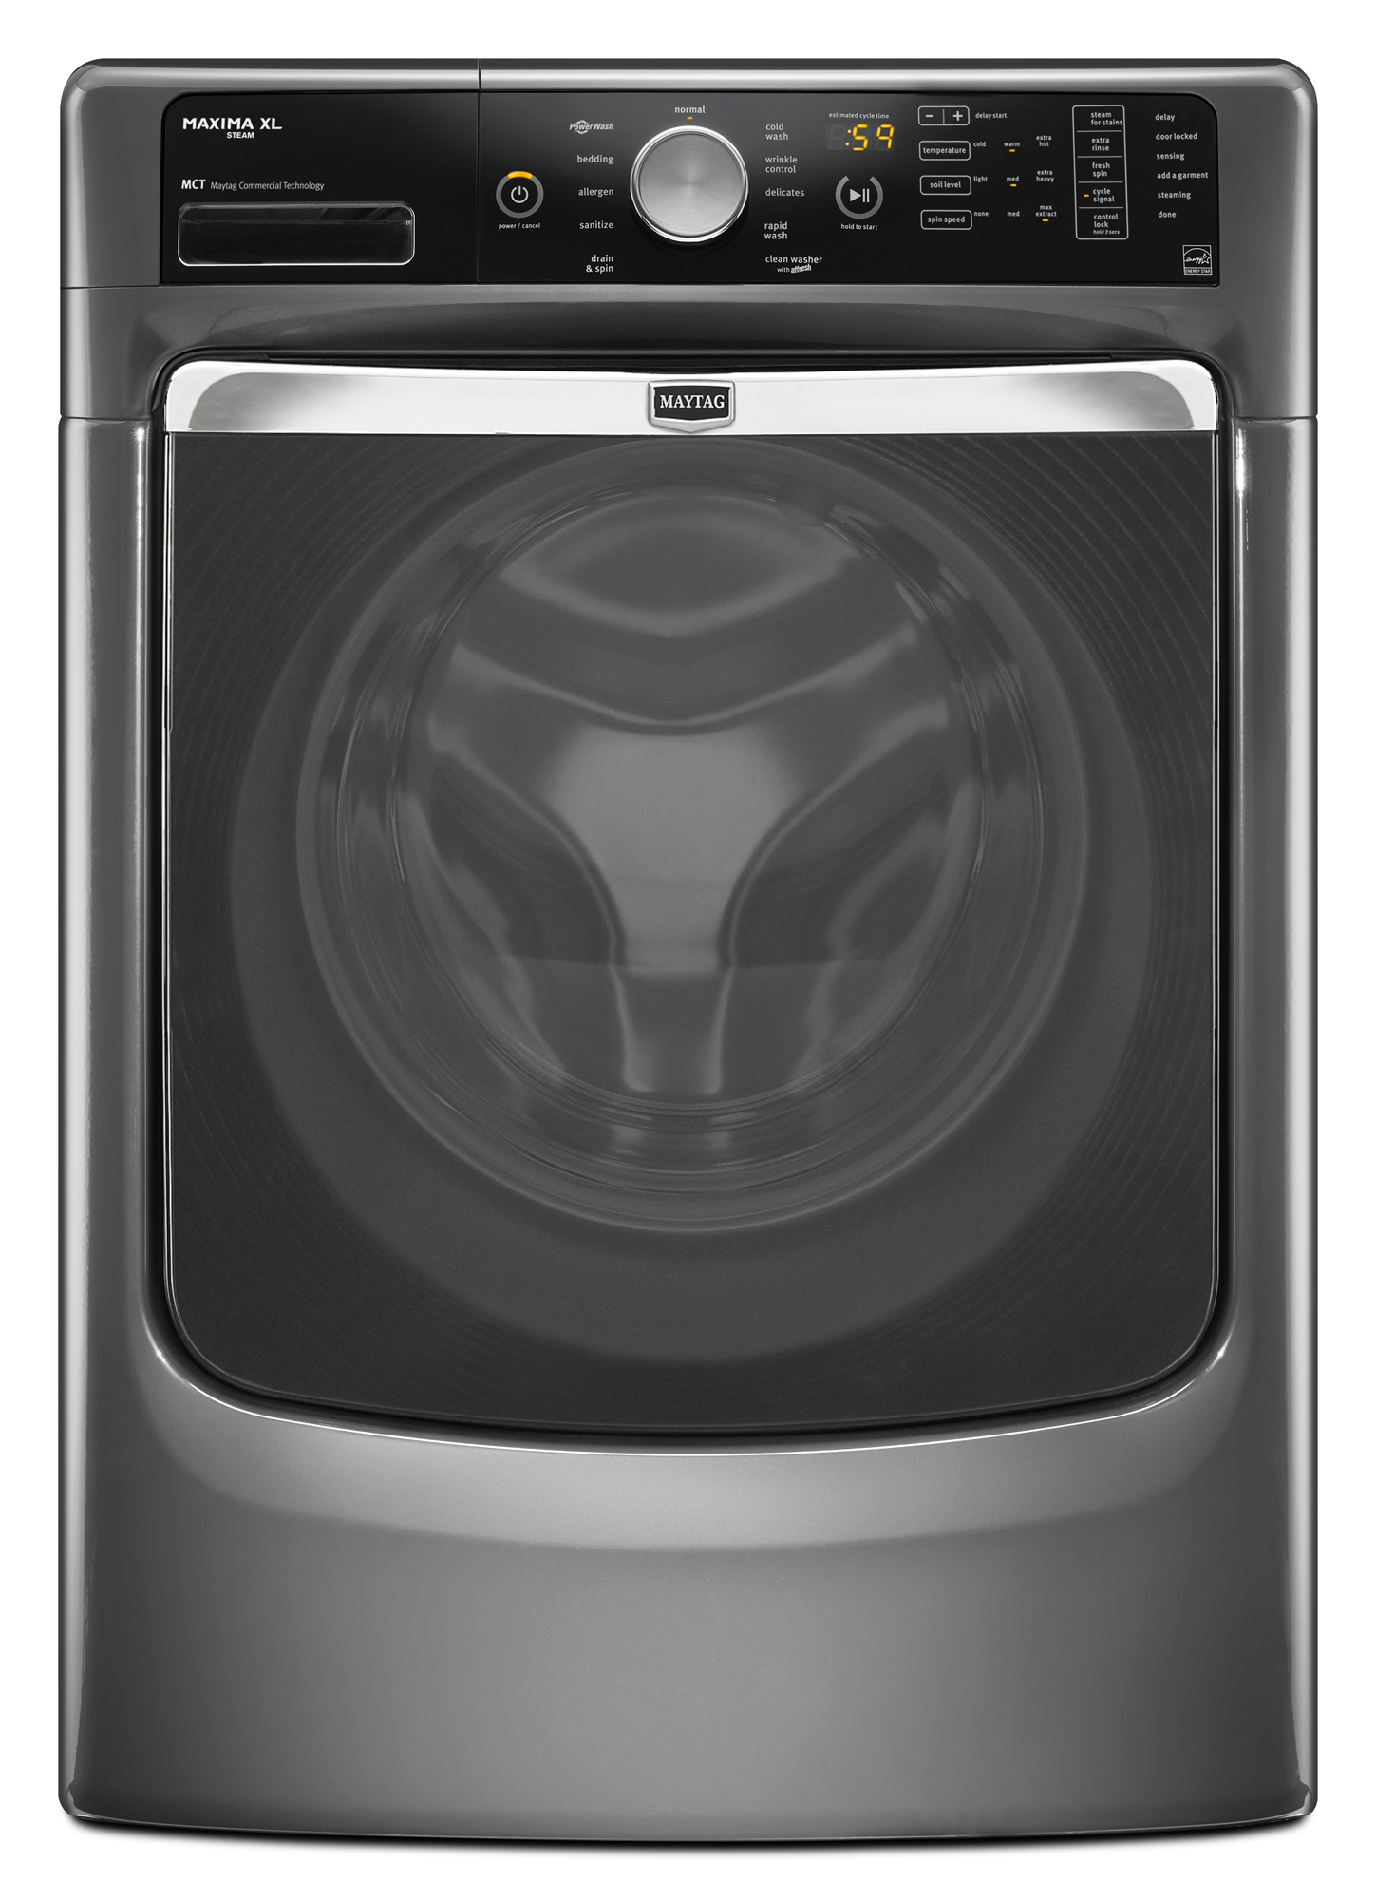 Maytag 4.3 cu. ft. Front-Load Washer w/ Steam - Granite